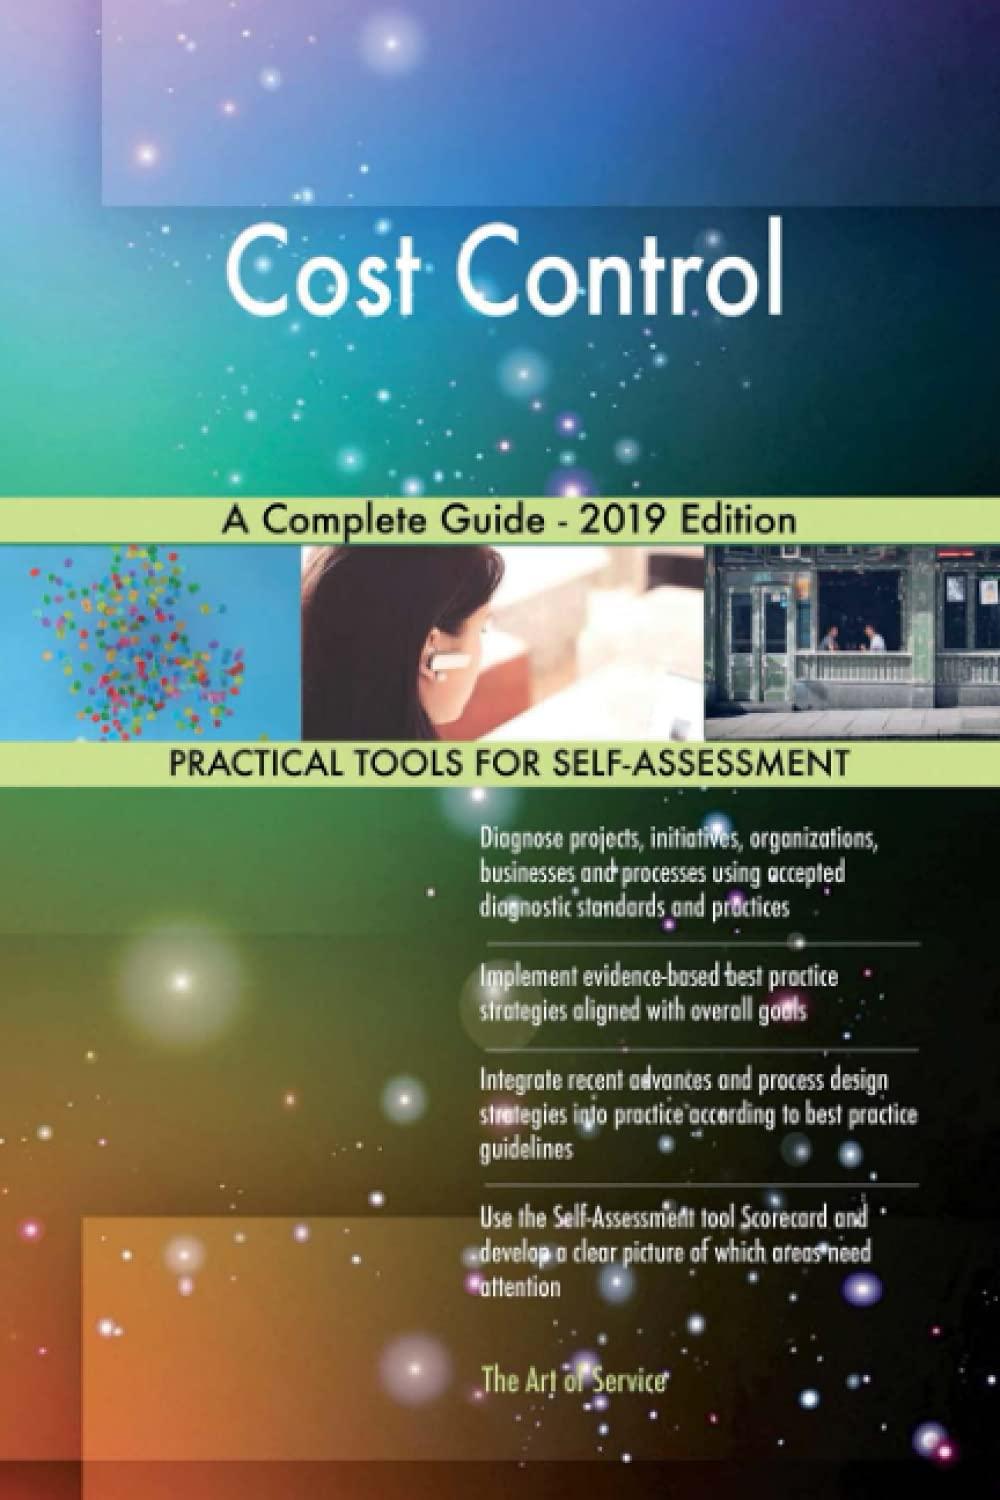 cost control a complete guide 2019th edition gerardus blokdyk 0655545905, 978-0655545903